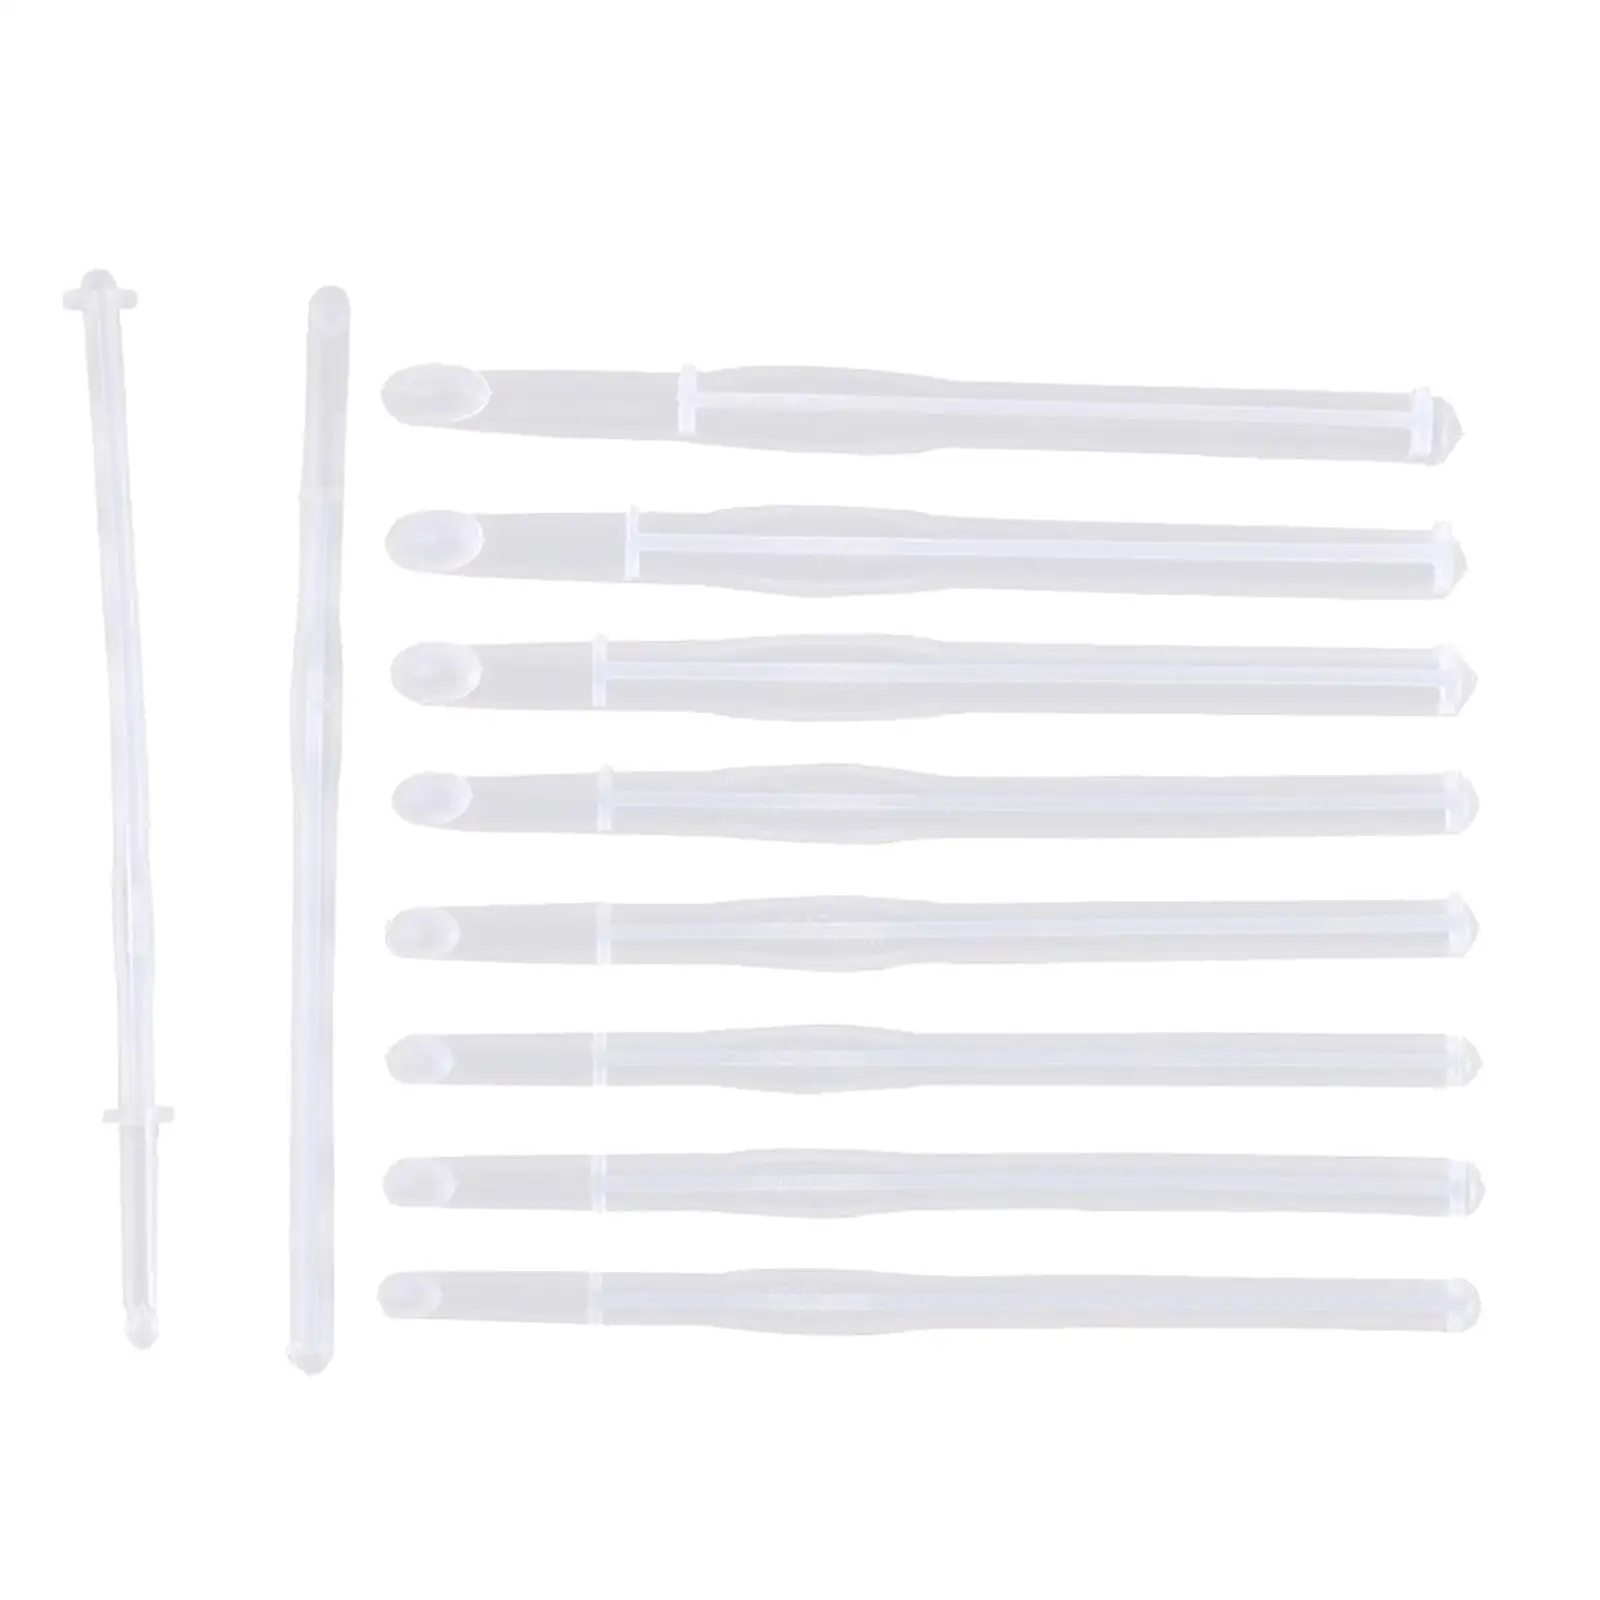 Soft Resin Silicone Crochet Hooks  for crafts Arthritic Hand Sewing